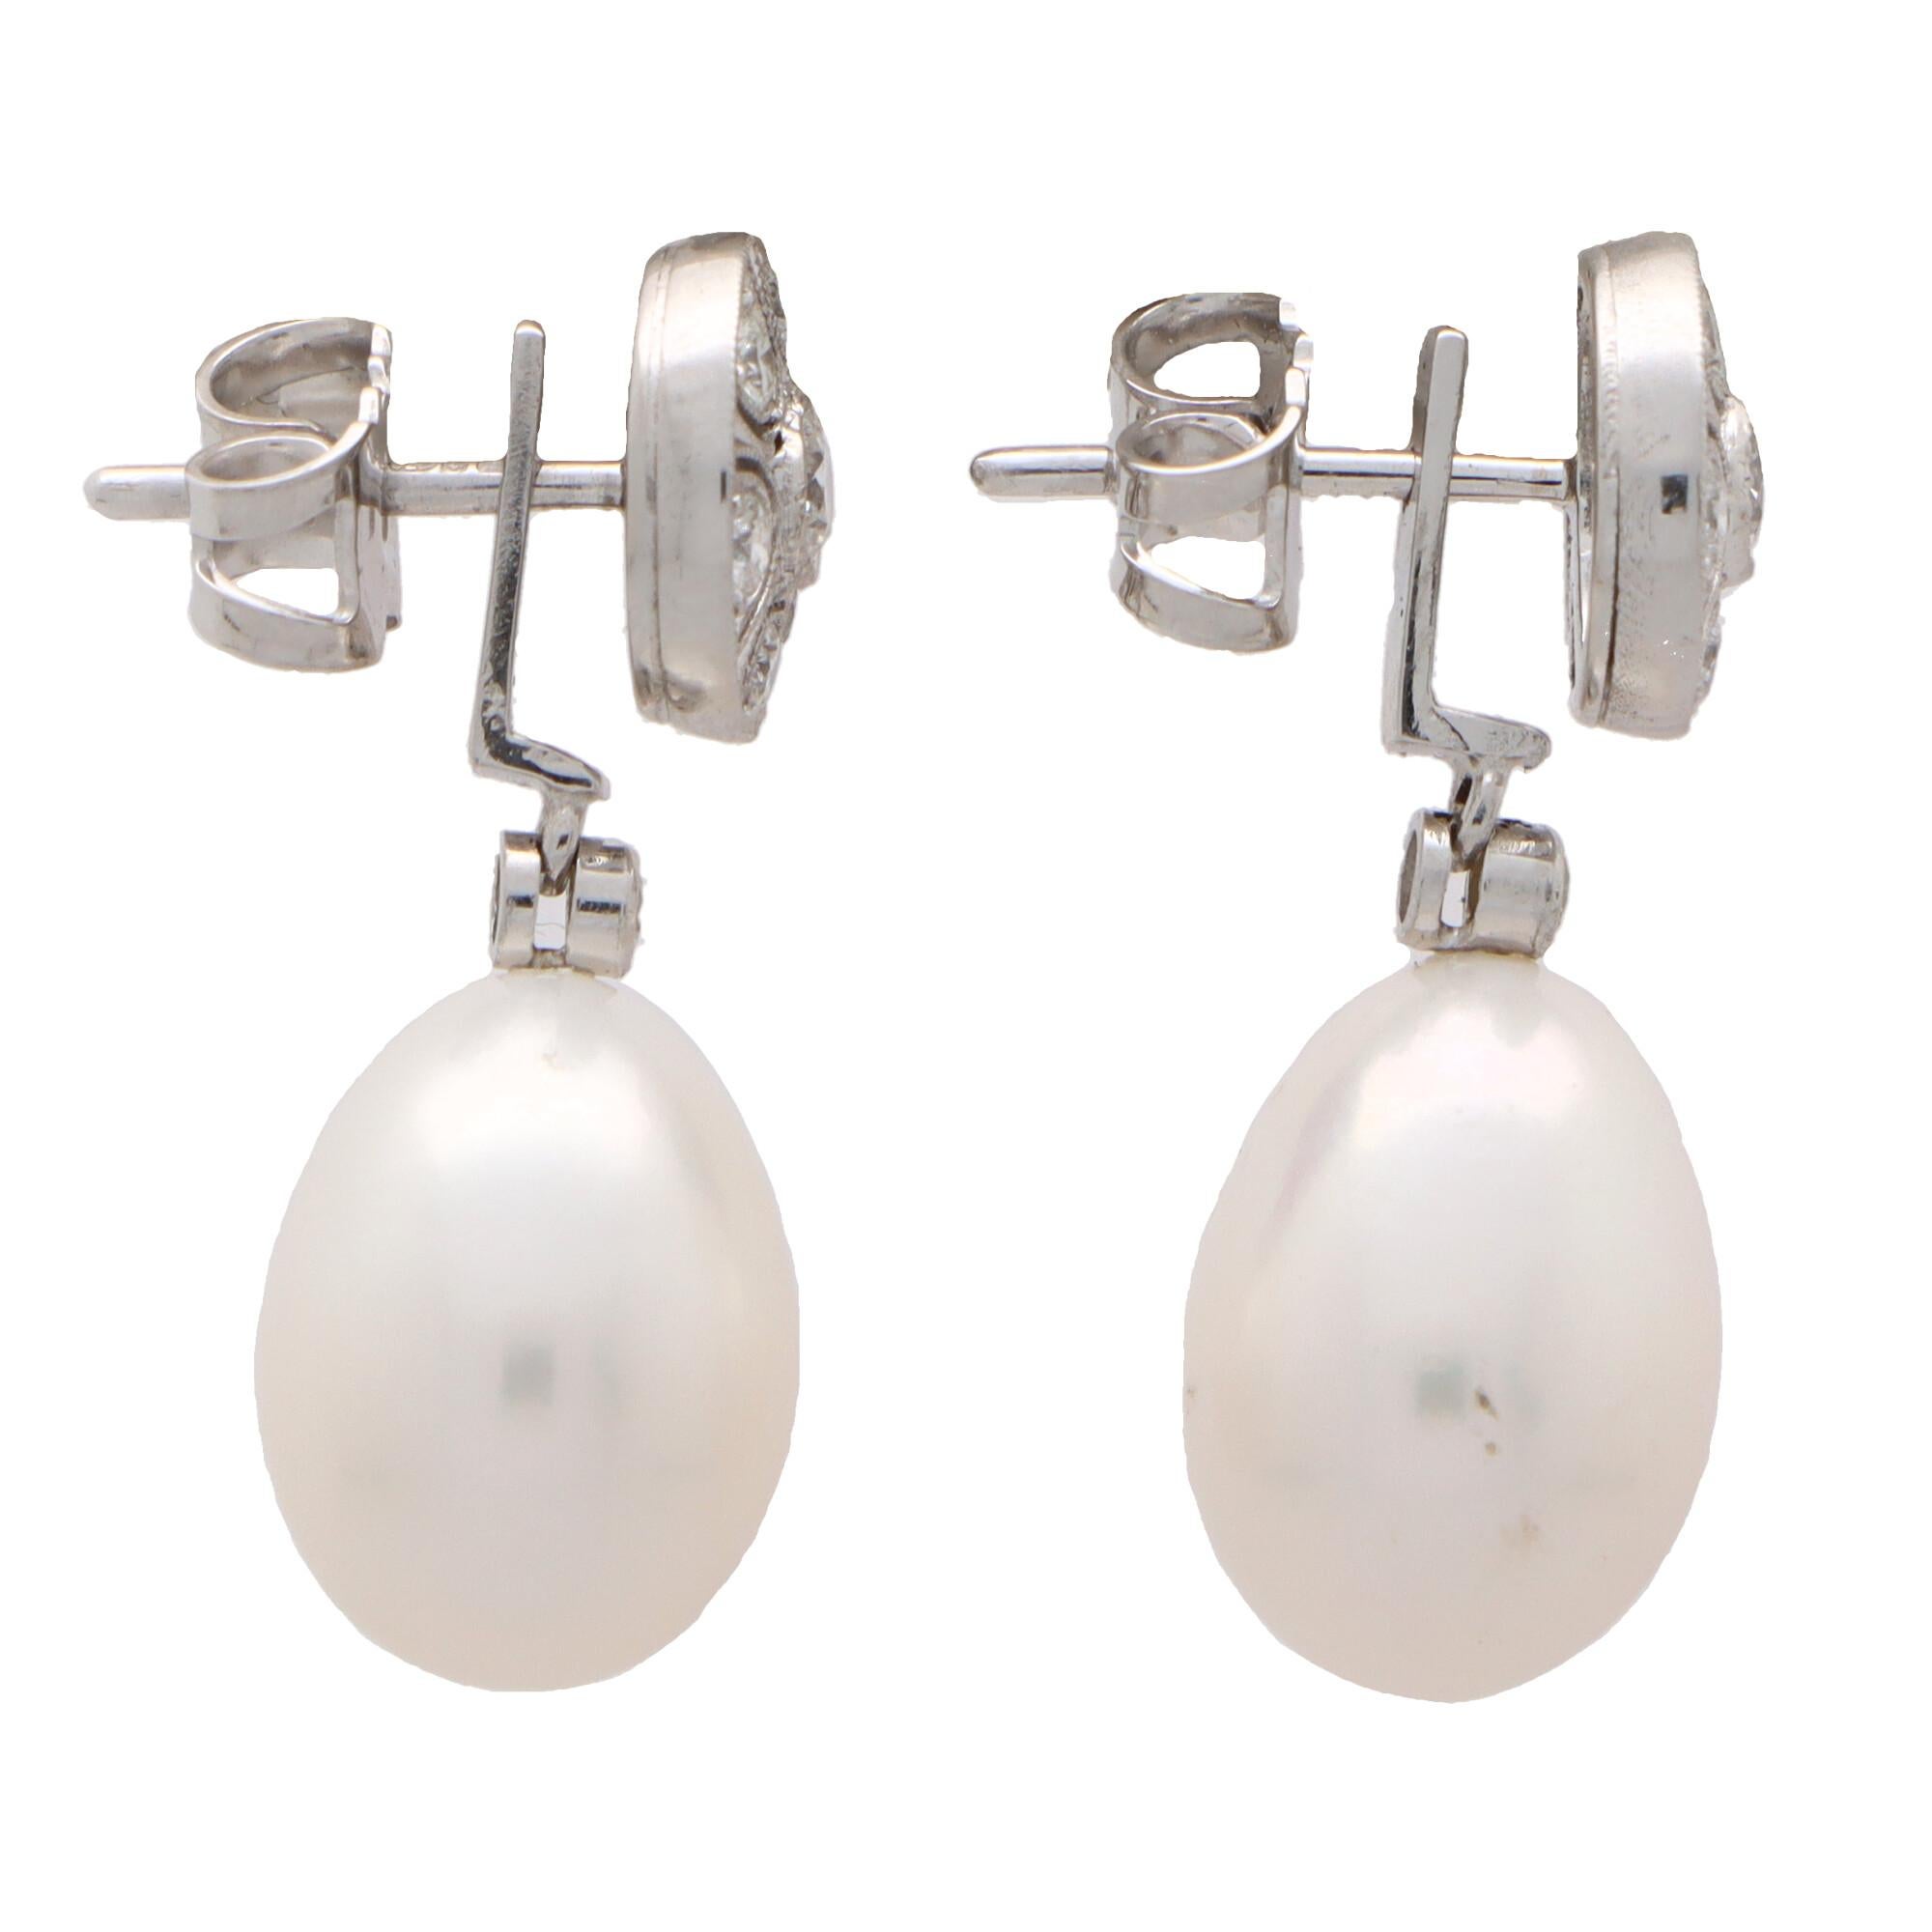 A beautiful pair of convertible pearl and diamond earrings set in 18k white gold.

Each earring is firstly composed of an openwork diamond cluster stud set with exactly 7 round brilliant cut diamonds. Hanging from this stud is a 9 x 12-millimetre